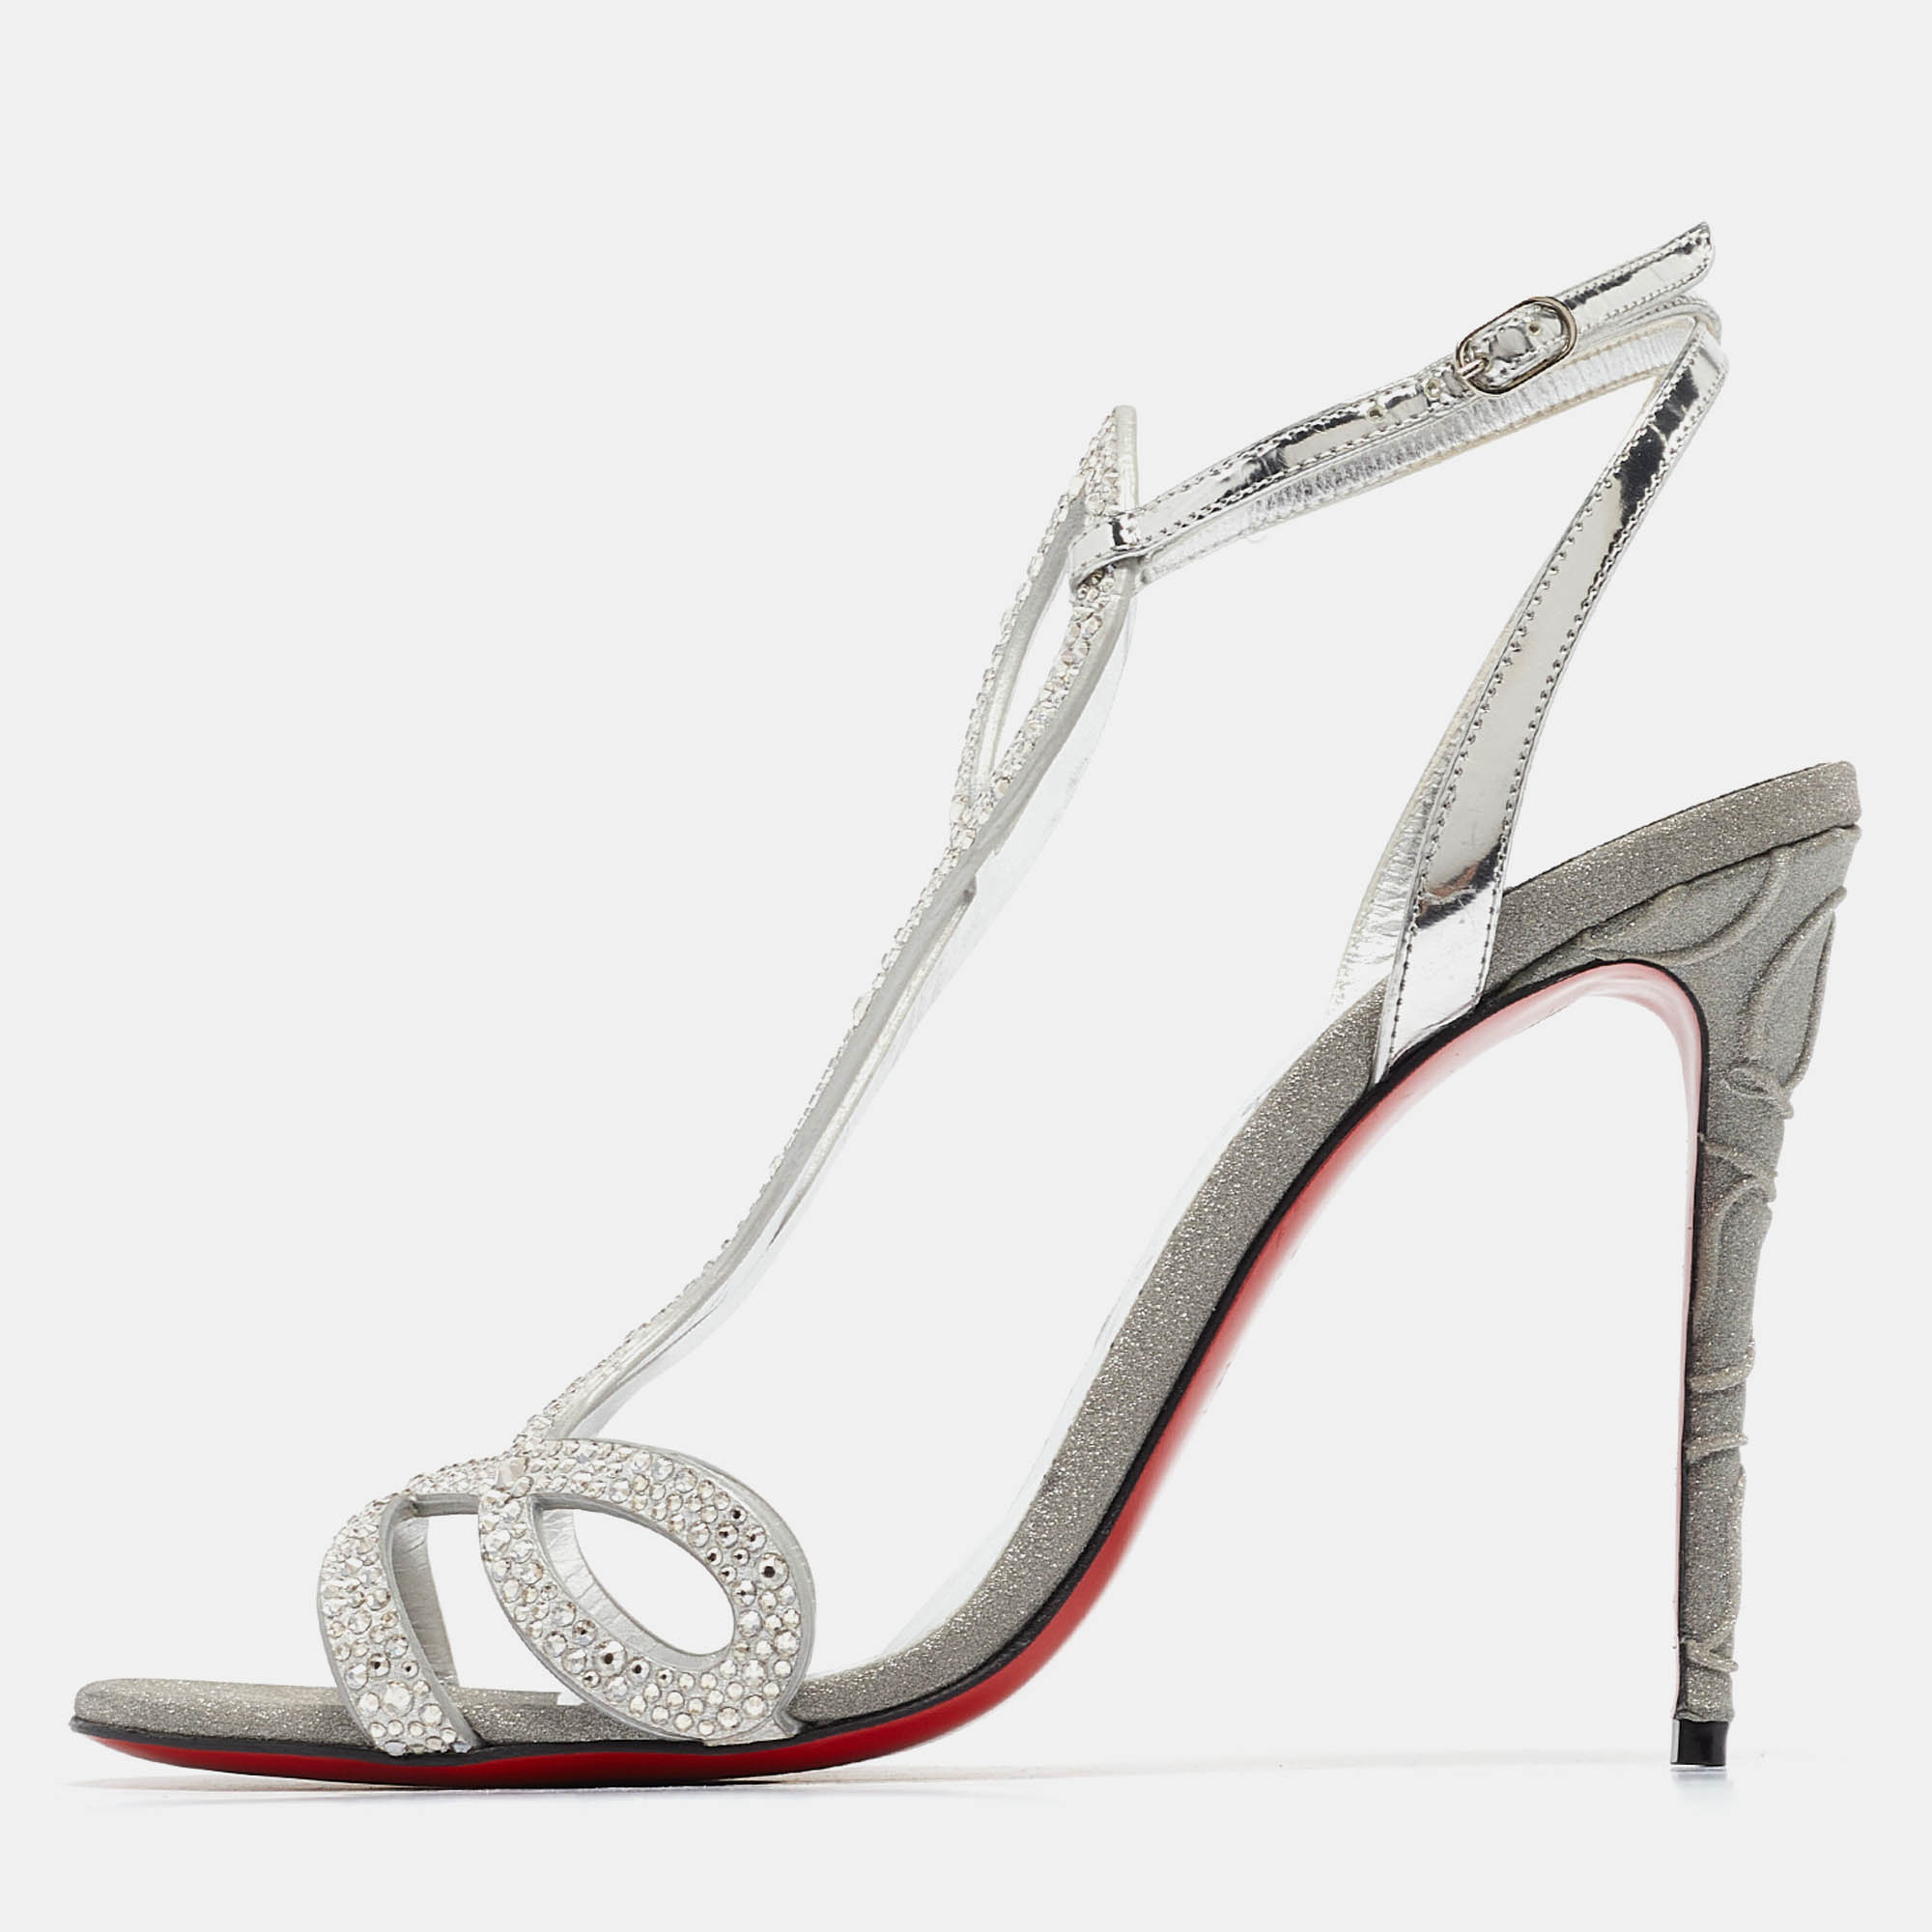 Christian louboutin silver leather crystal embellished double l sandals size 39